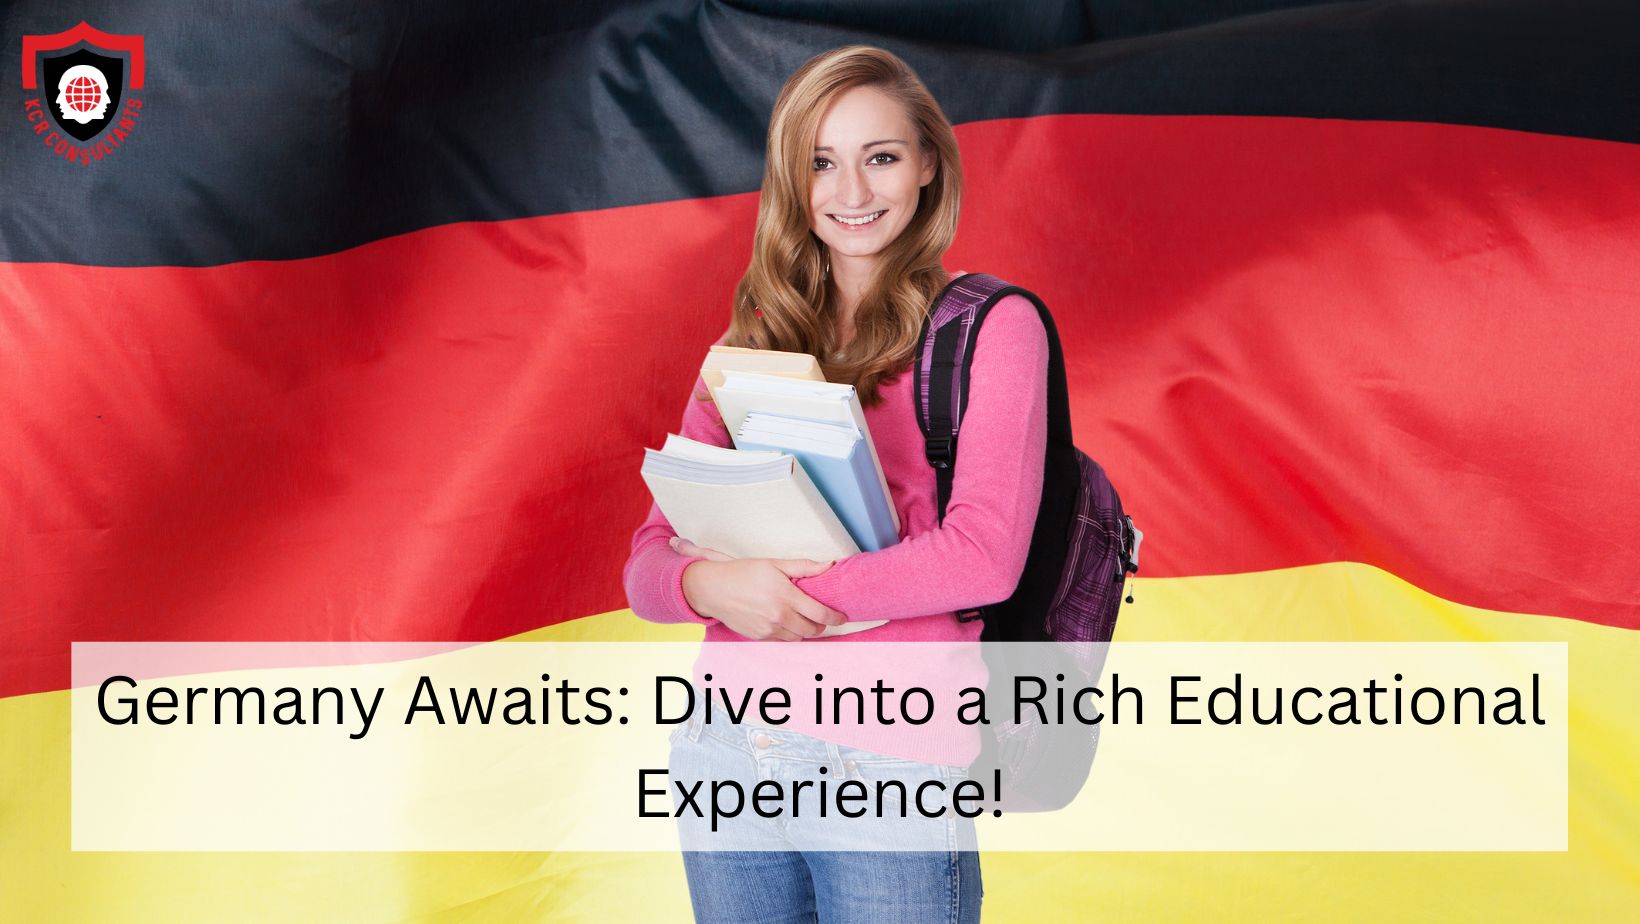 Studying in Germany - KCR CONSULTANTS - Education experience in germany